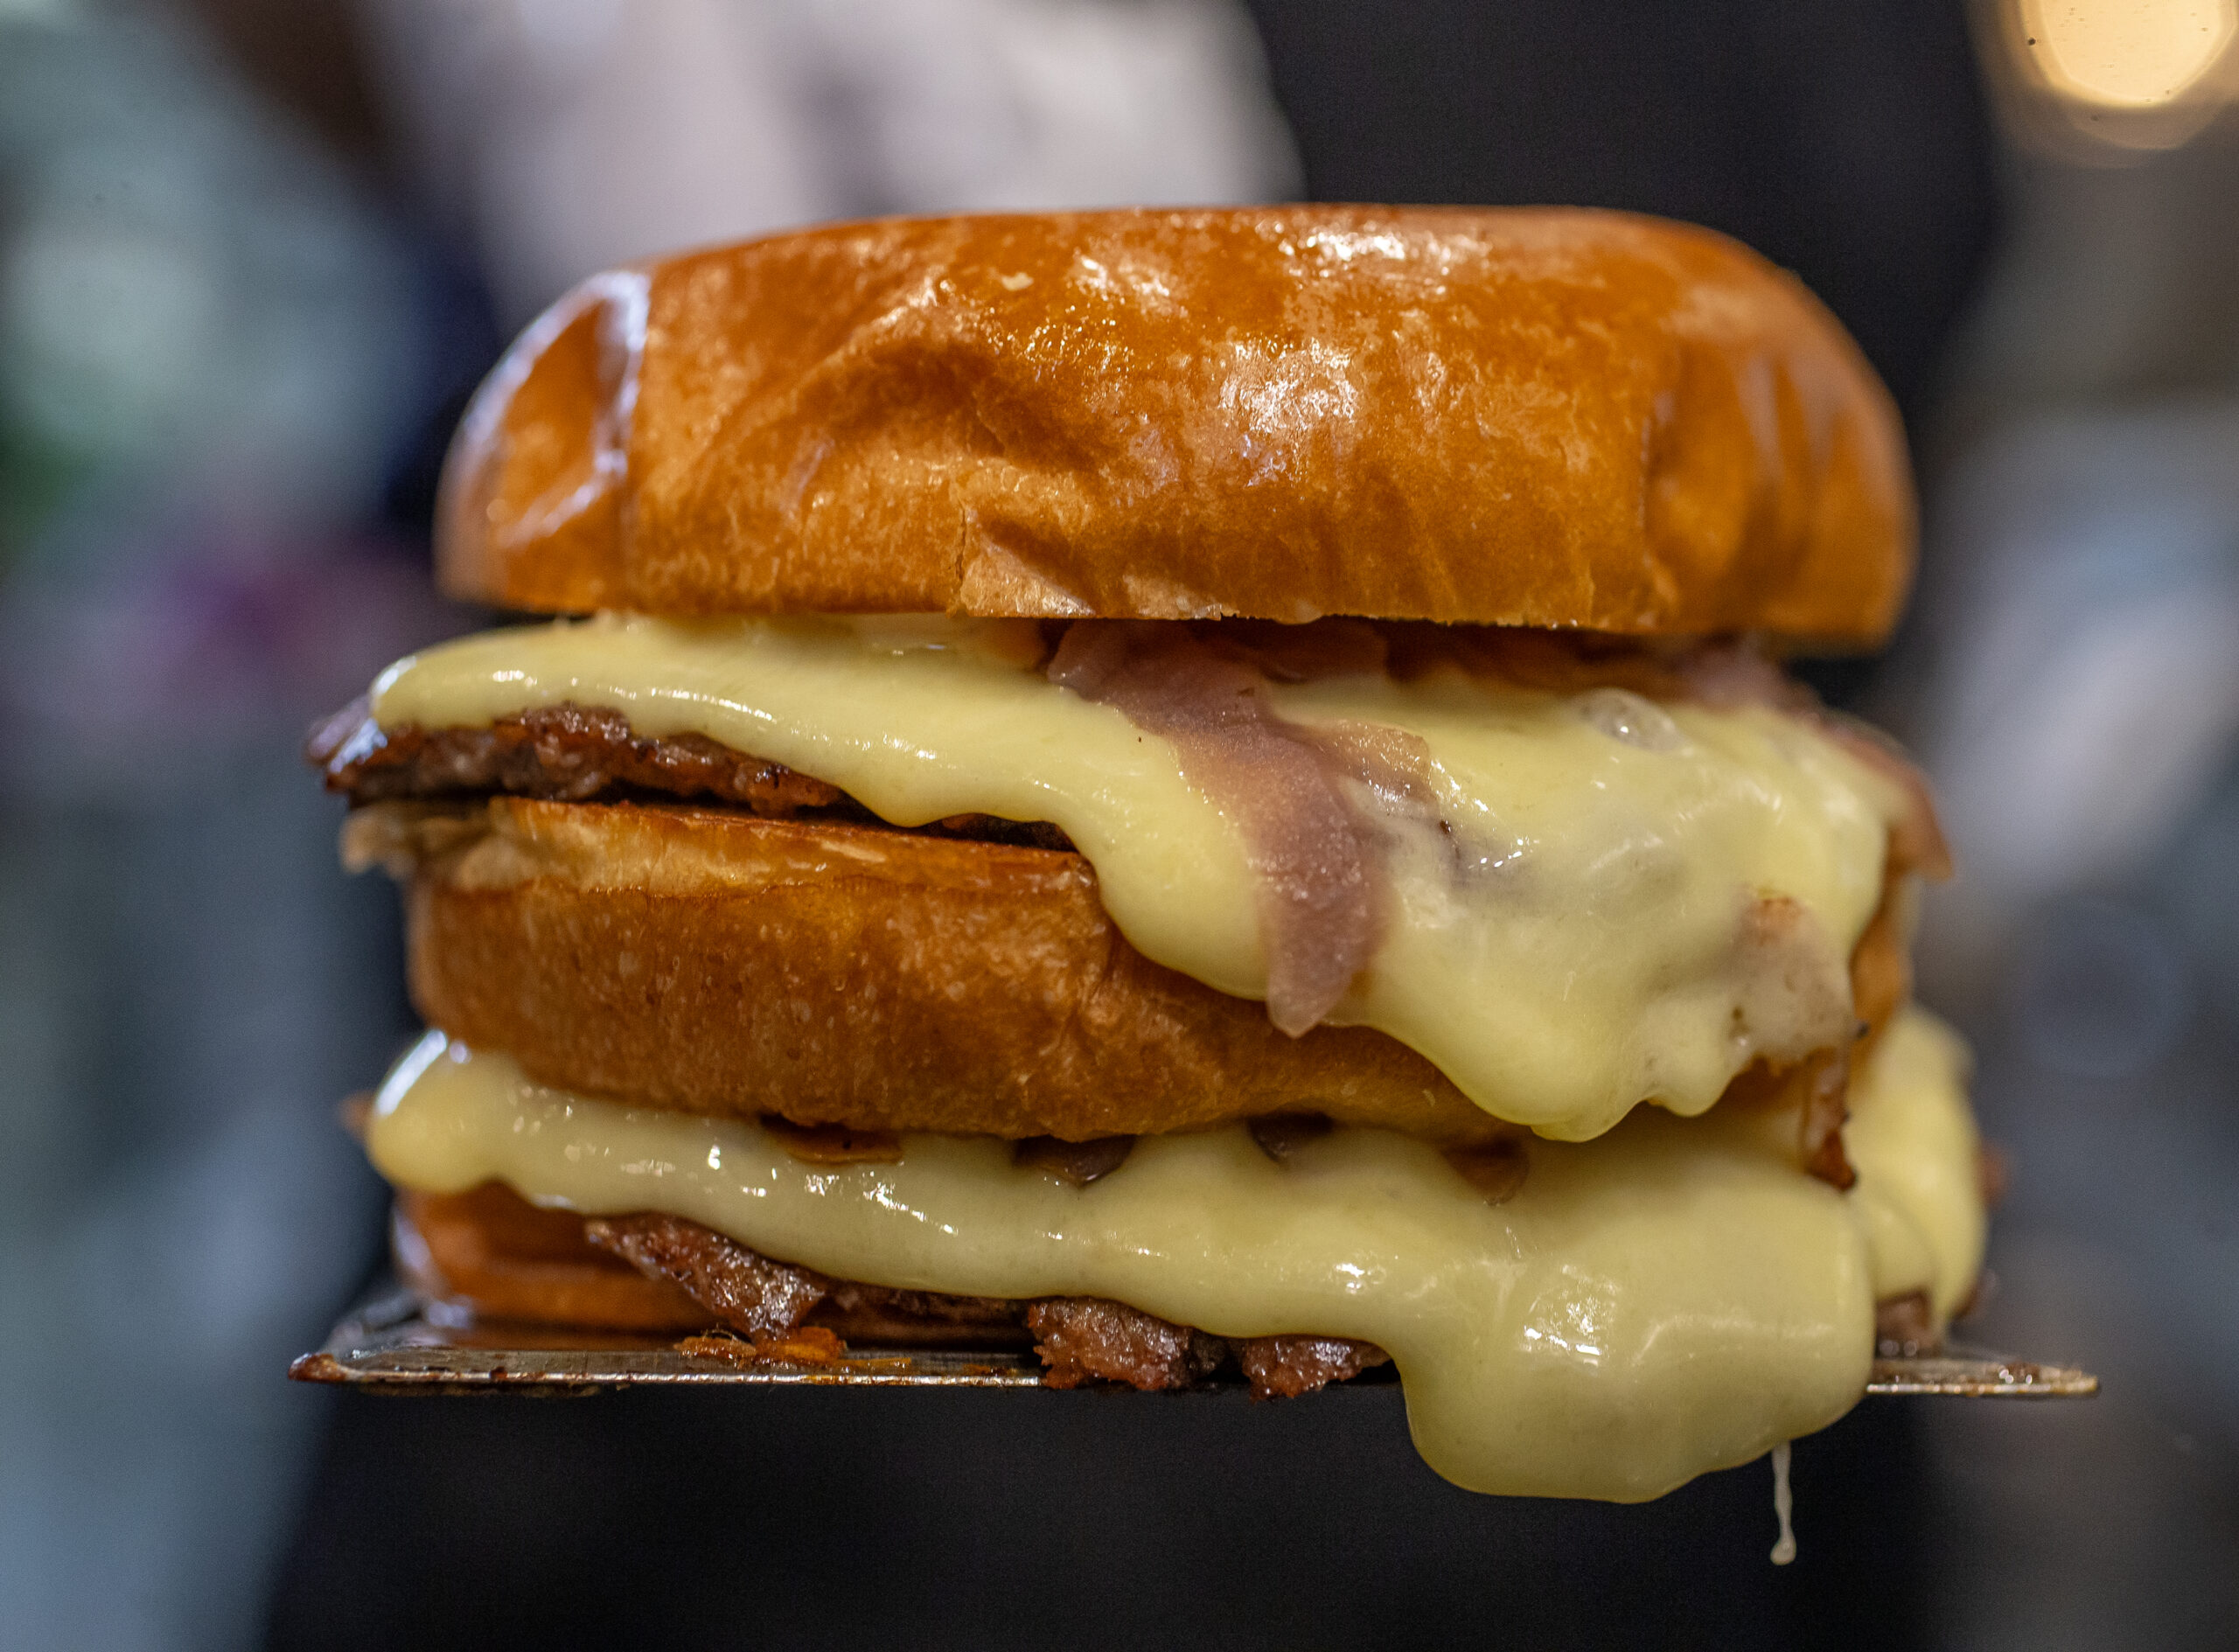 Iggy’s Organic Burgers with duck fat and beef patty, buttery brioche, organic American cheese, ketchup, mustard, onions caramelized with a secret sauce, and pickles are served on the plaza, Friday in Downtown Healdsburg June 30, 2023. (Chad Surmick / The Press Democrat)